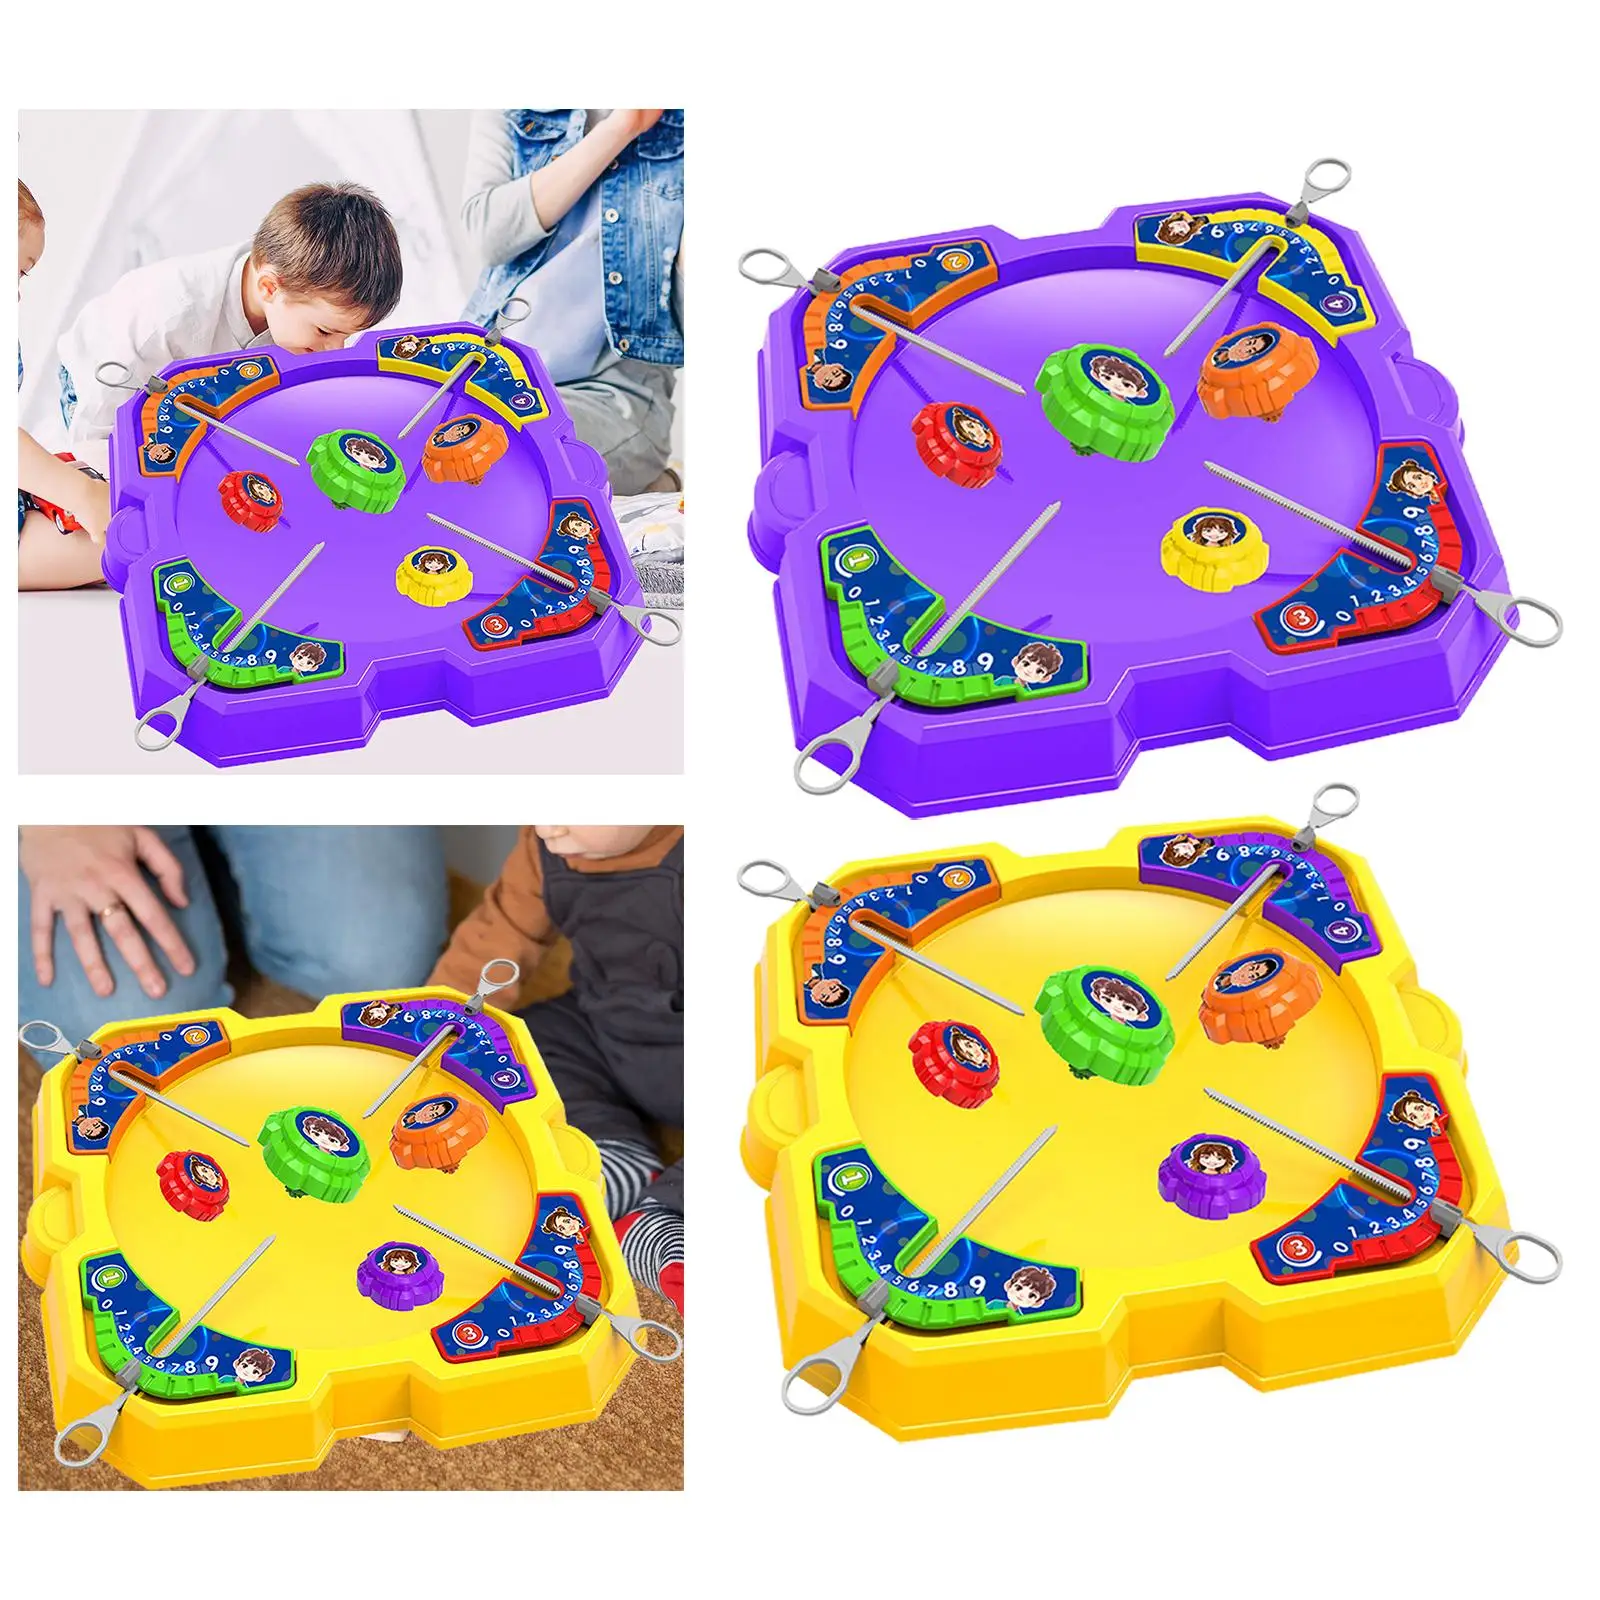 Gyro Toy Set Battling Game Activity Toy Durable for Desktop Parties Unisex